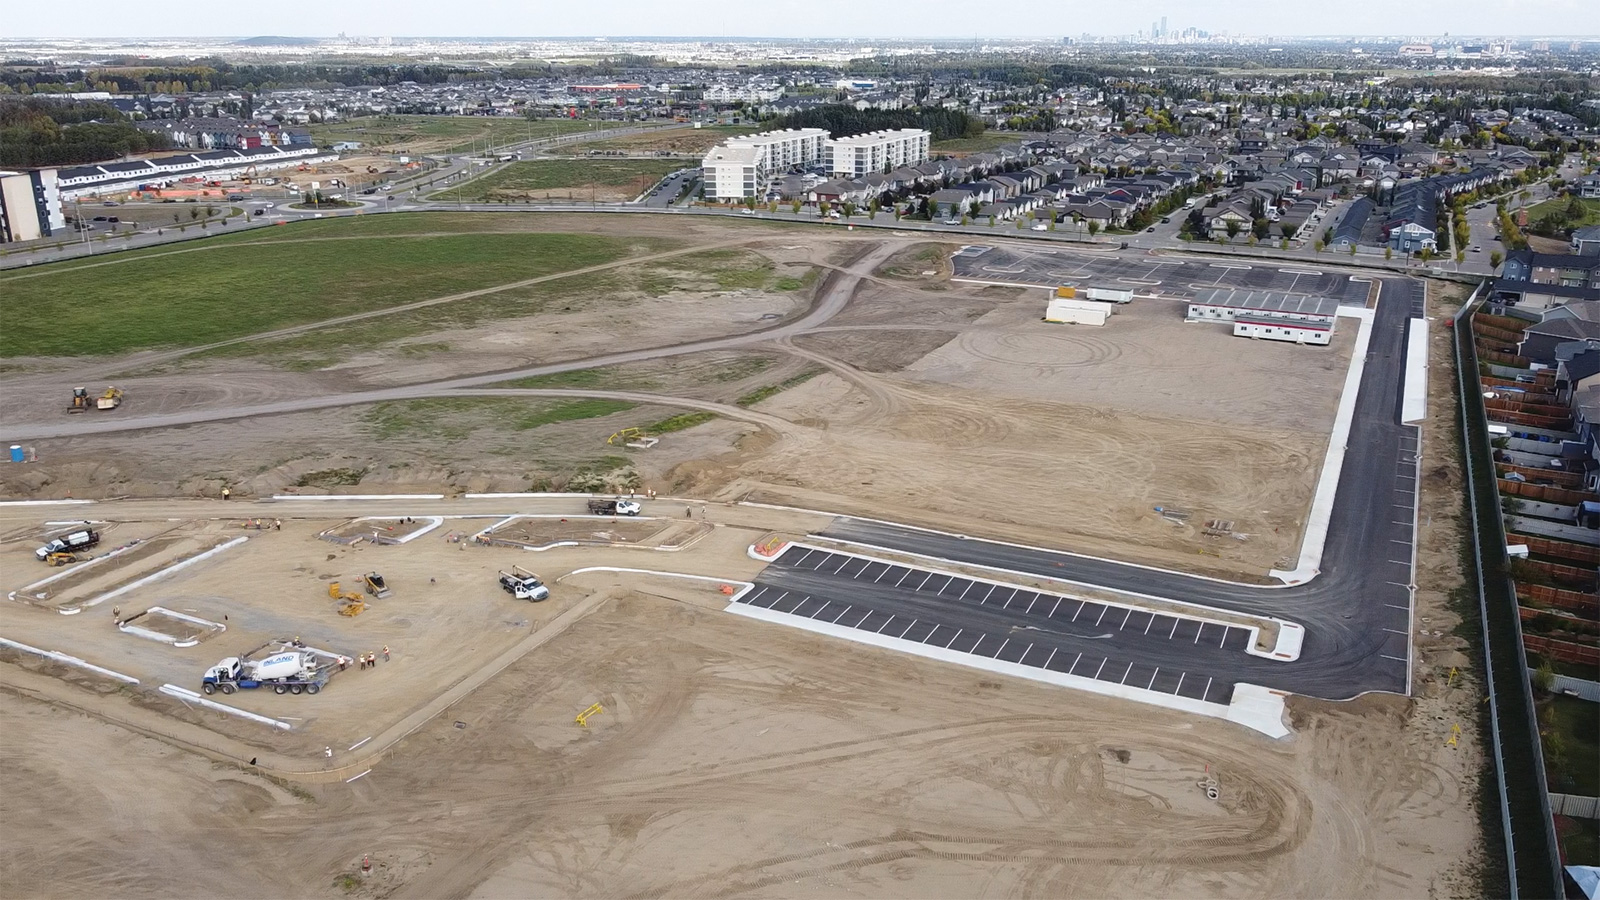 Southwest view of the site showing concrete and asphalt paving scopes for the Early Works project